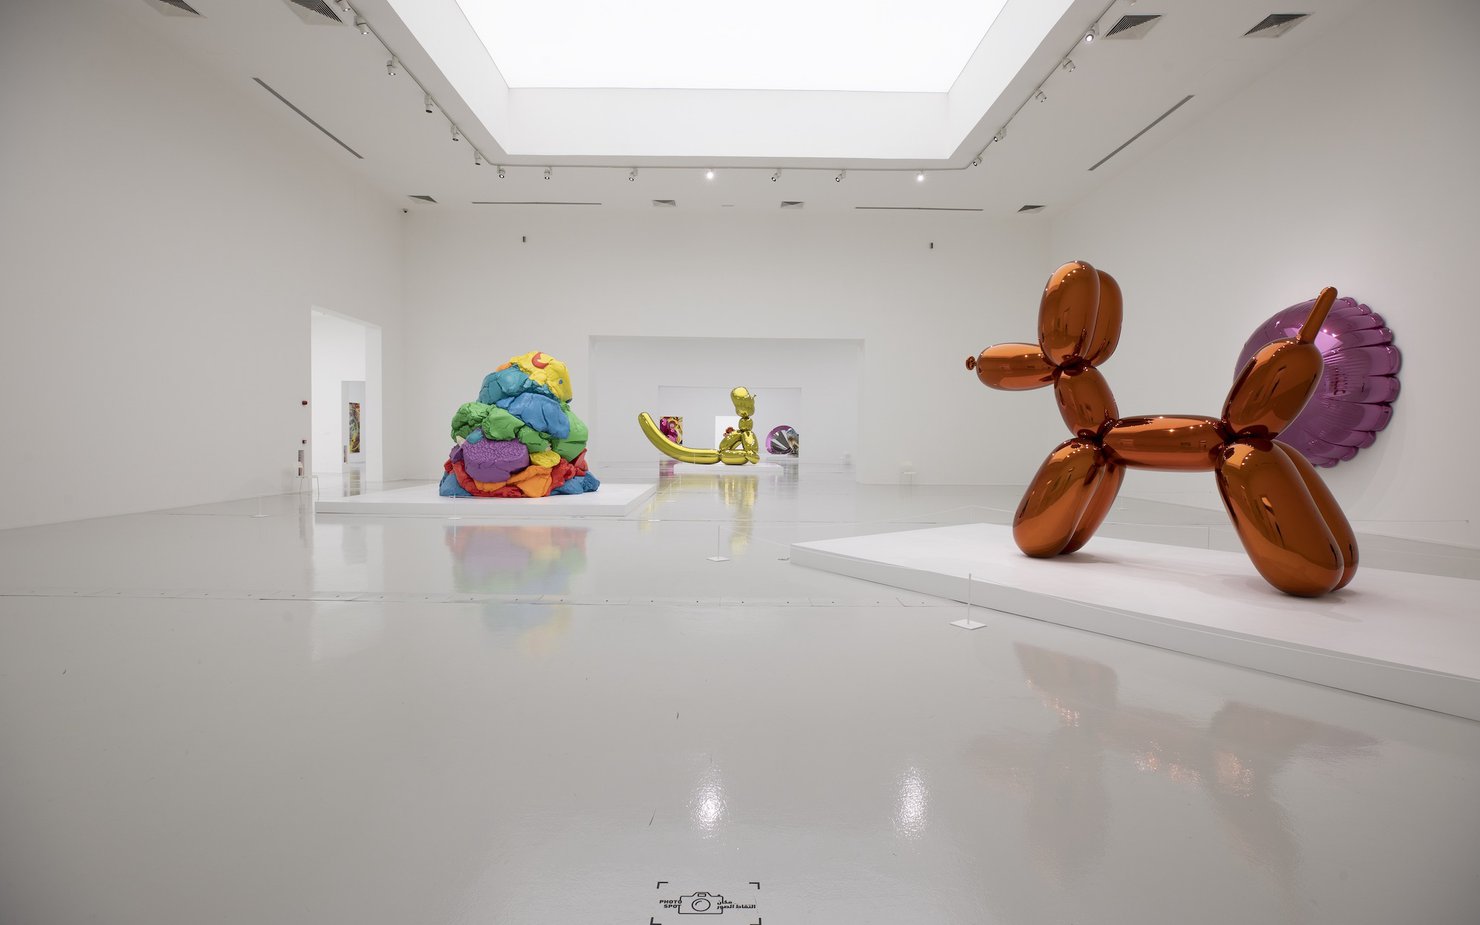 One of the galleries of the exhibition Jeff Koons: Lost in America, with the artworks Balloon Dog and Play-Doh in the foreground